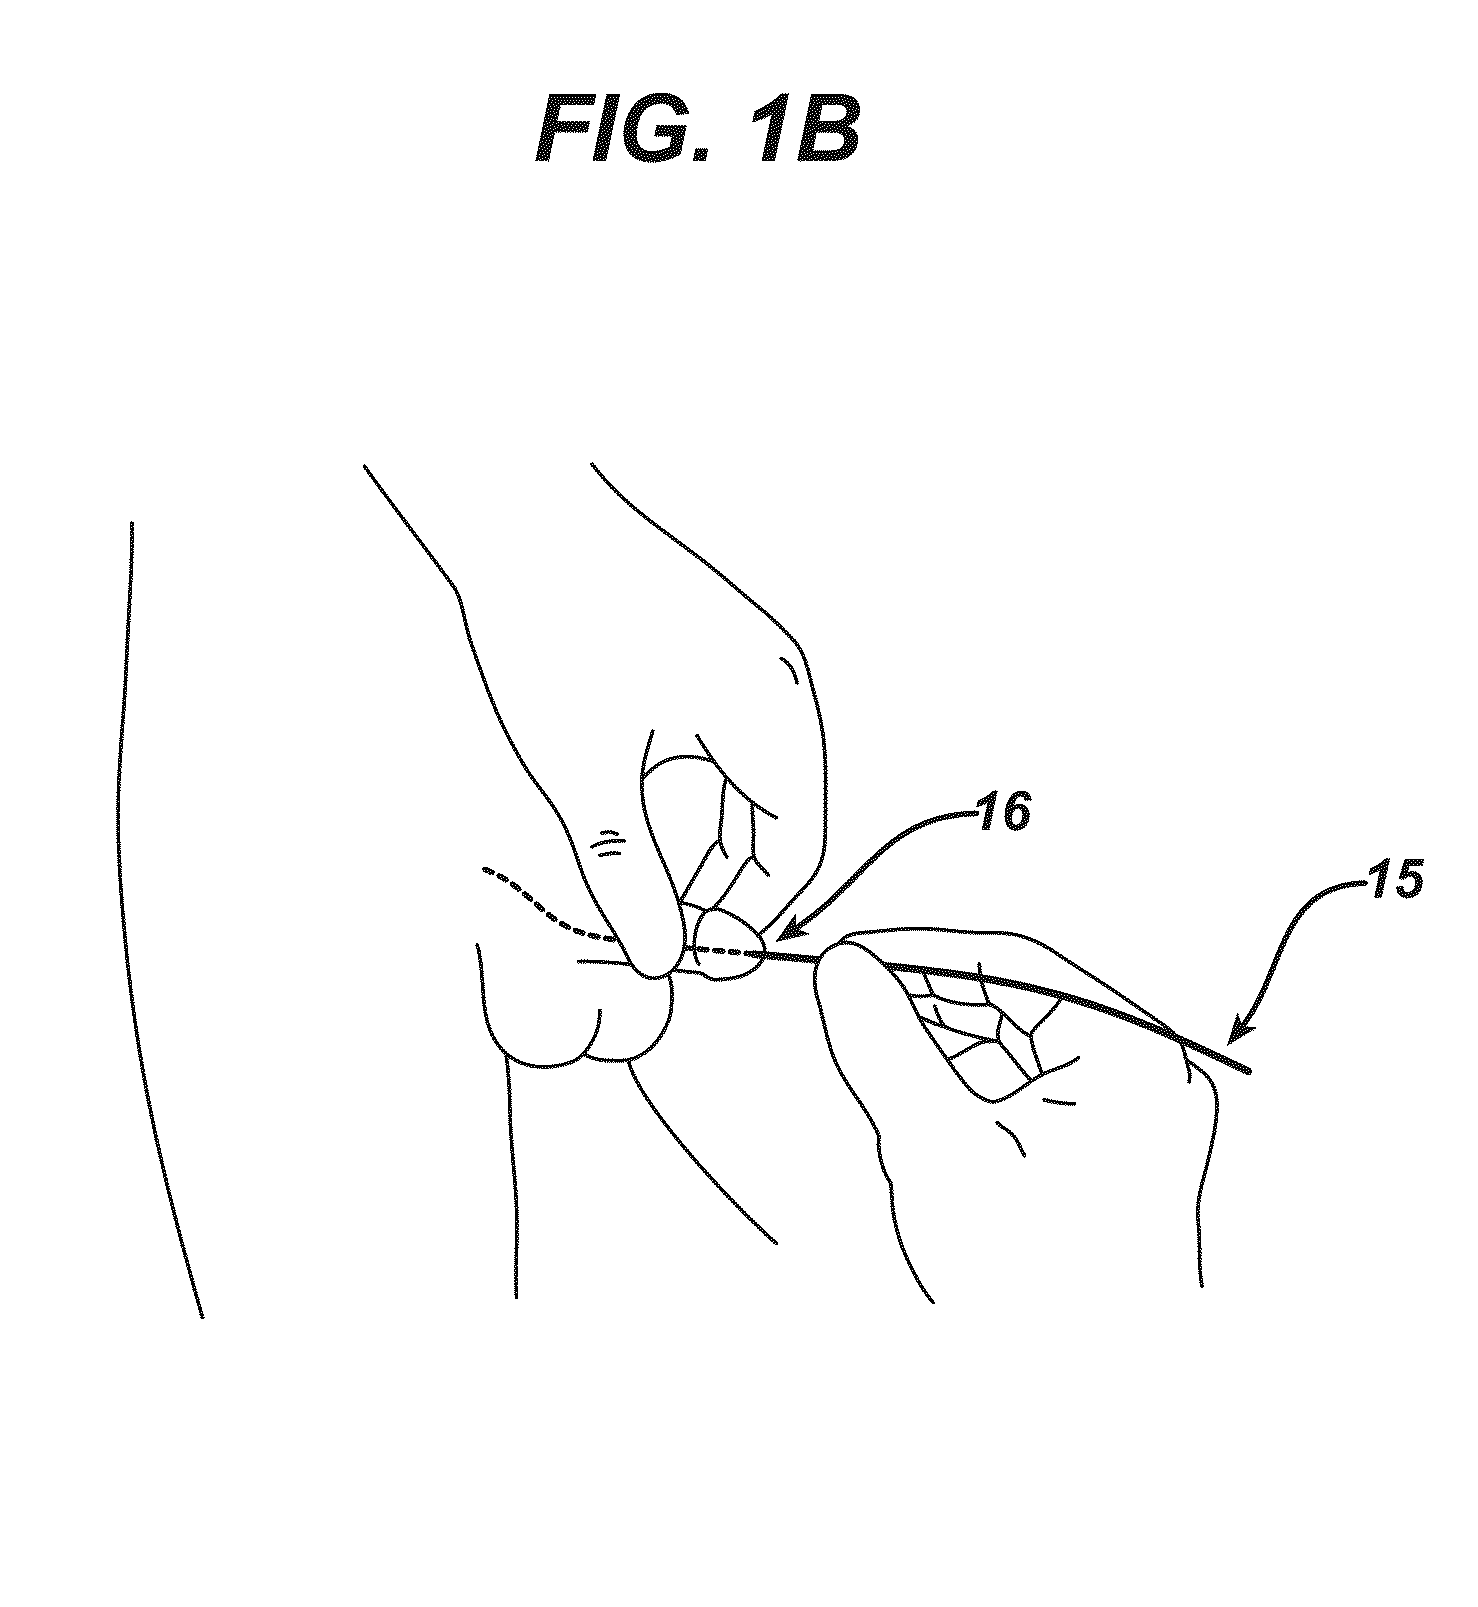 Methods and devices for preventing catheter related urinary tract infections